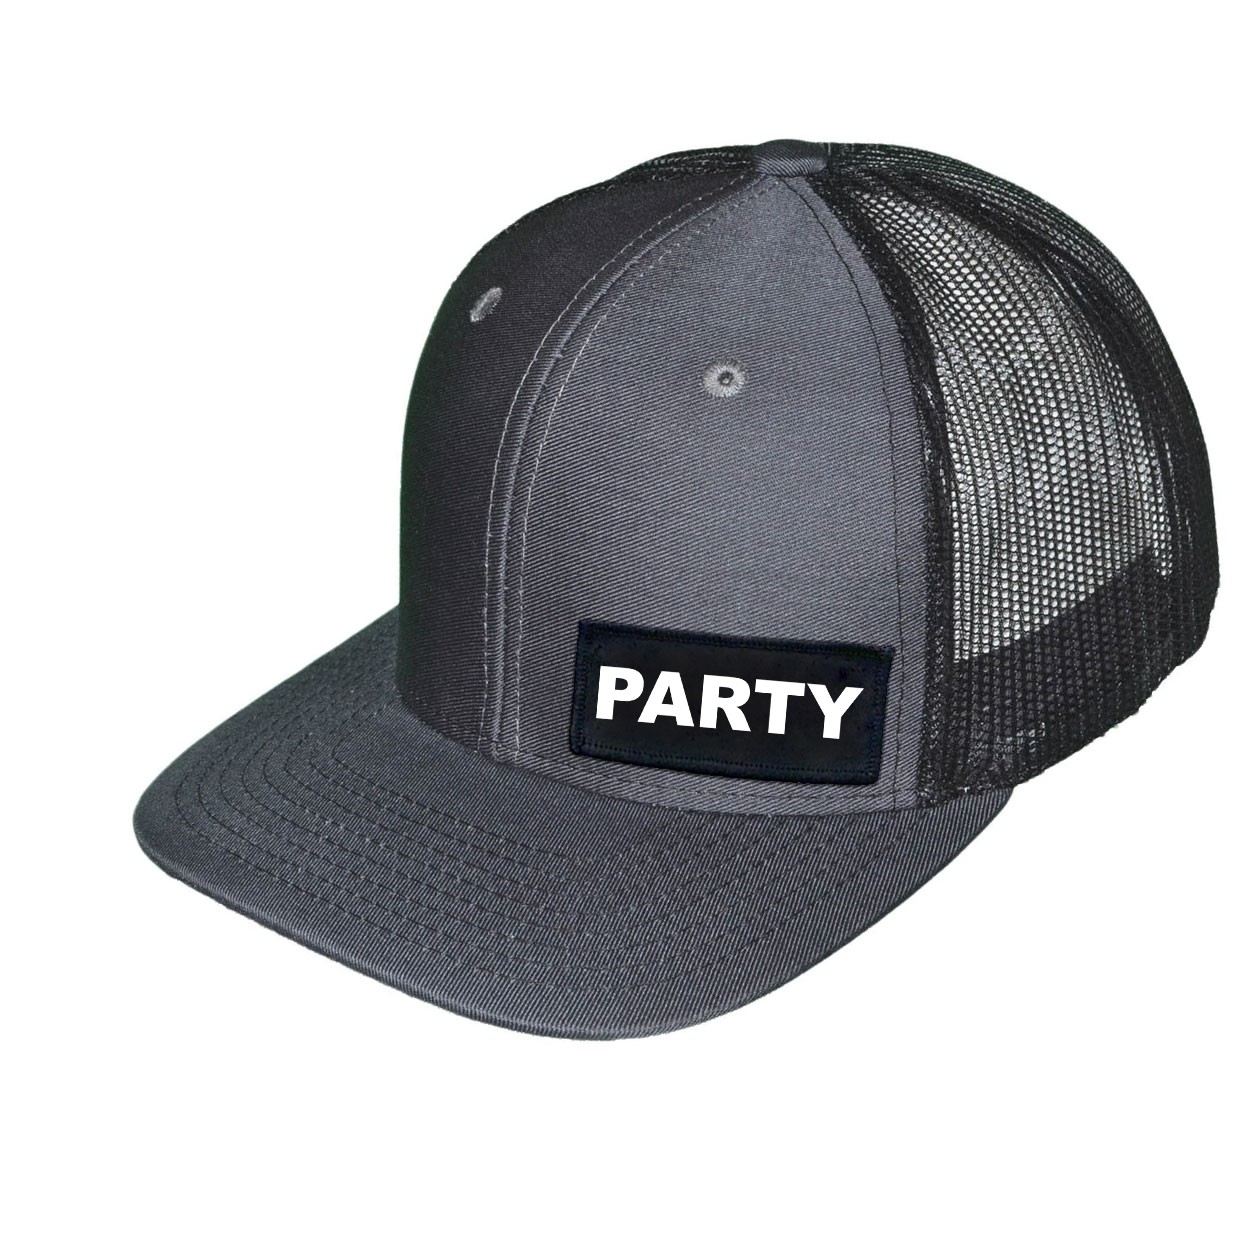 Party Brand Logo Night Out Woven Patch Snapback Trucker Hat Dark Gray/Black